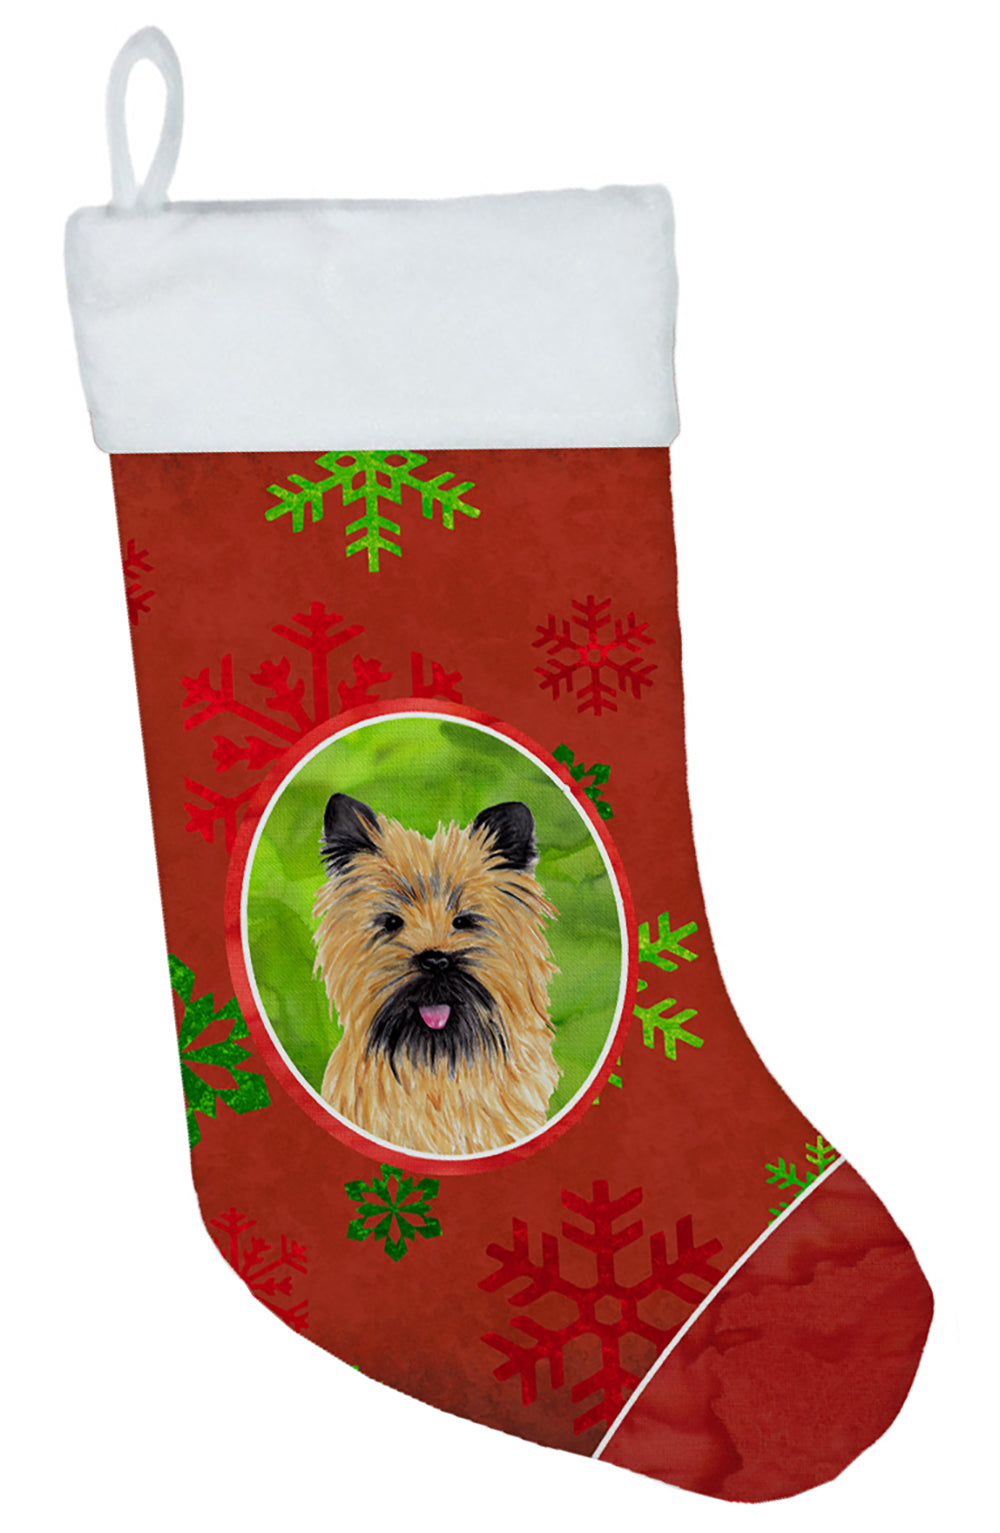 Cairn Terrier Red and Green Snowflakes Holiday  Christmas Stocking